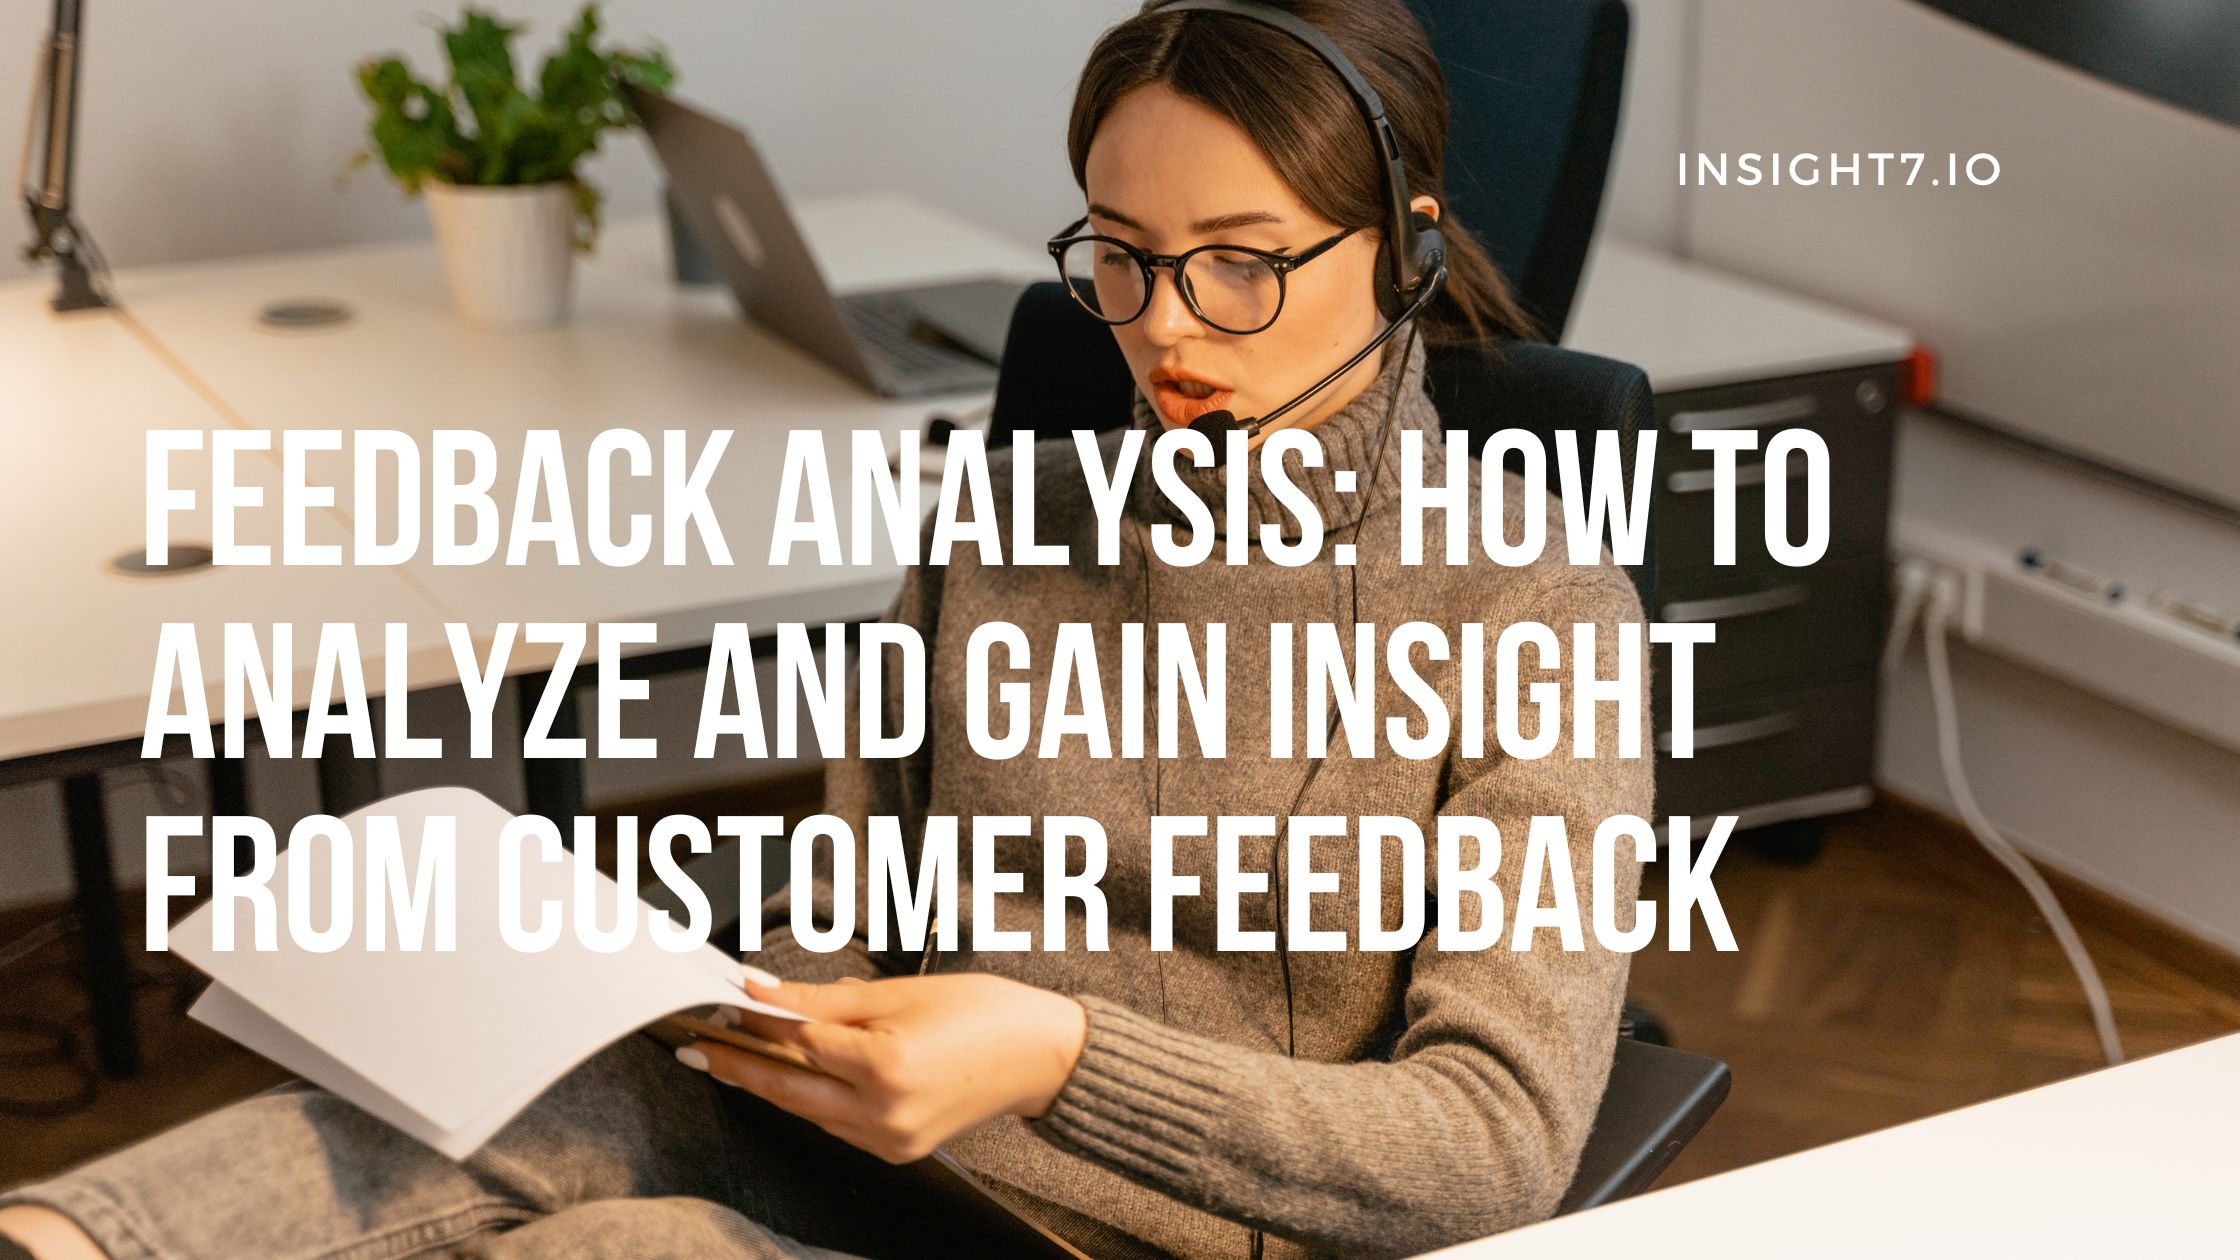 Feedback Analysis: How to analyze and gain insight from customer feedback